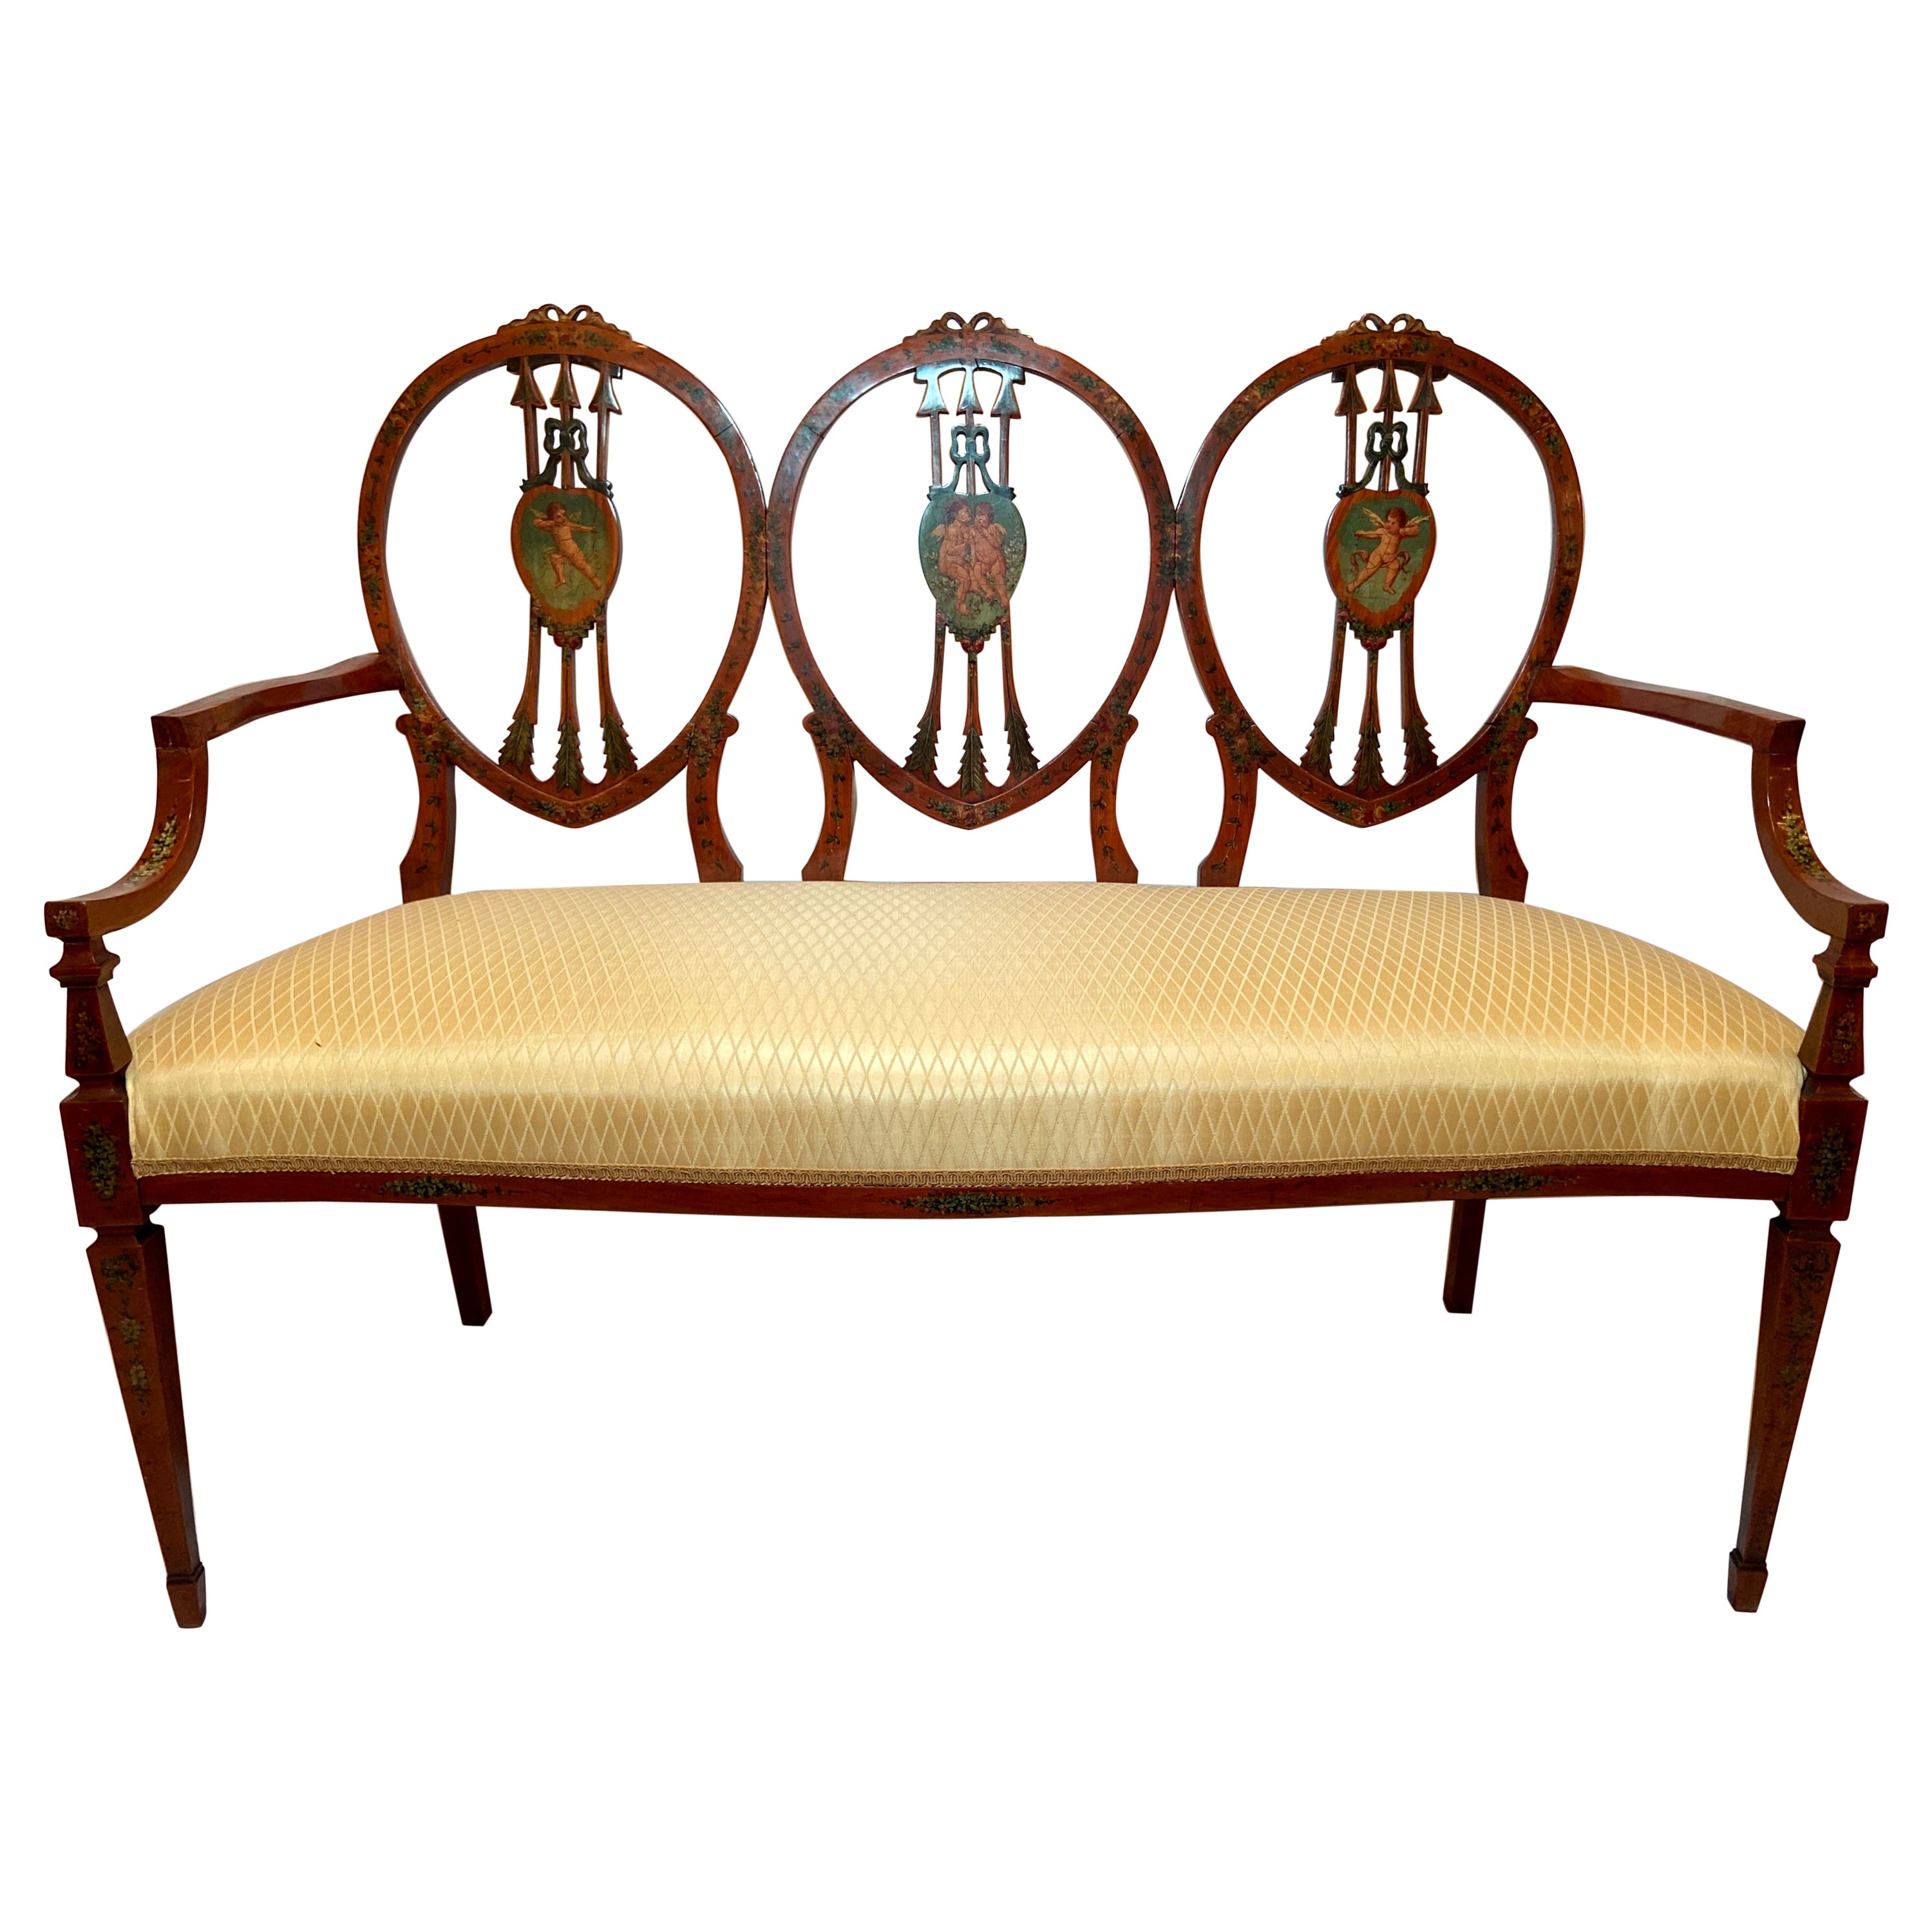 Antique English Satinwood Settee, Circa 1895-1910 For Sale